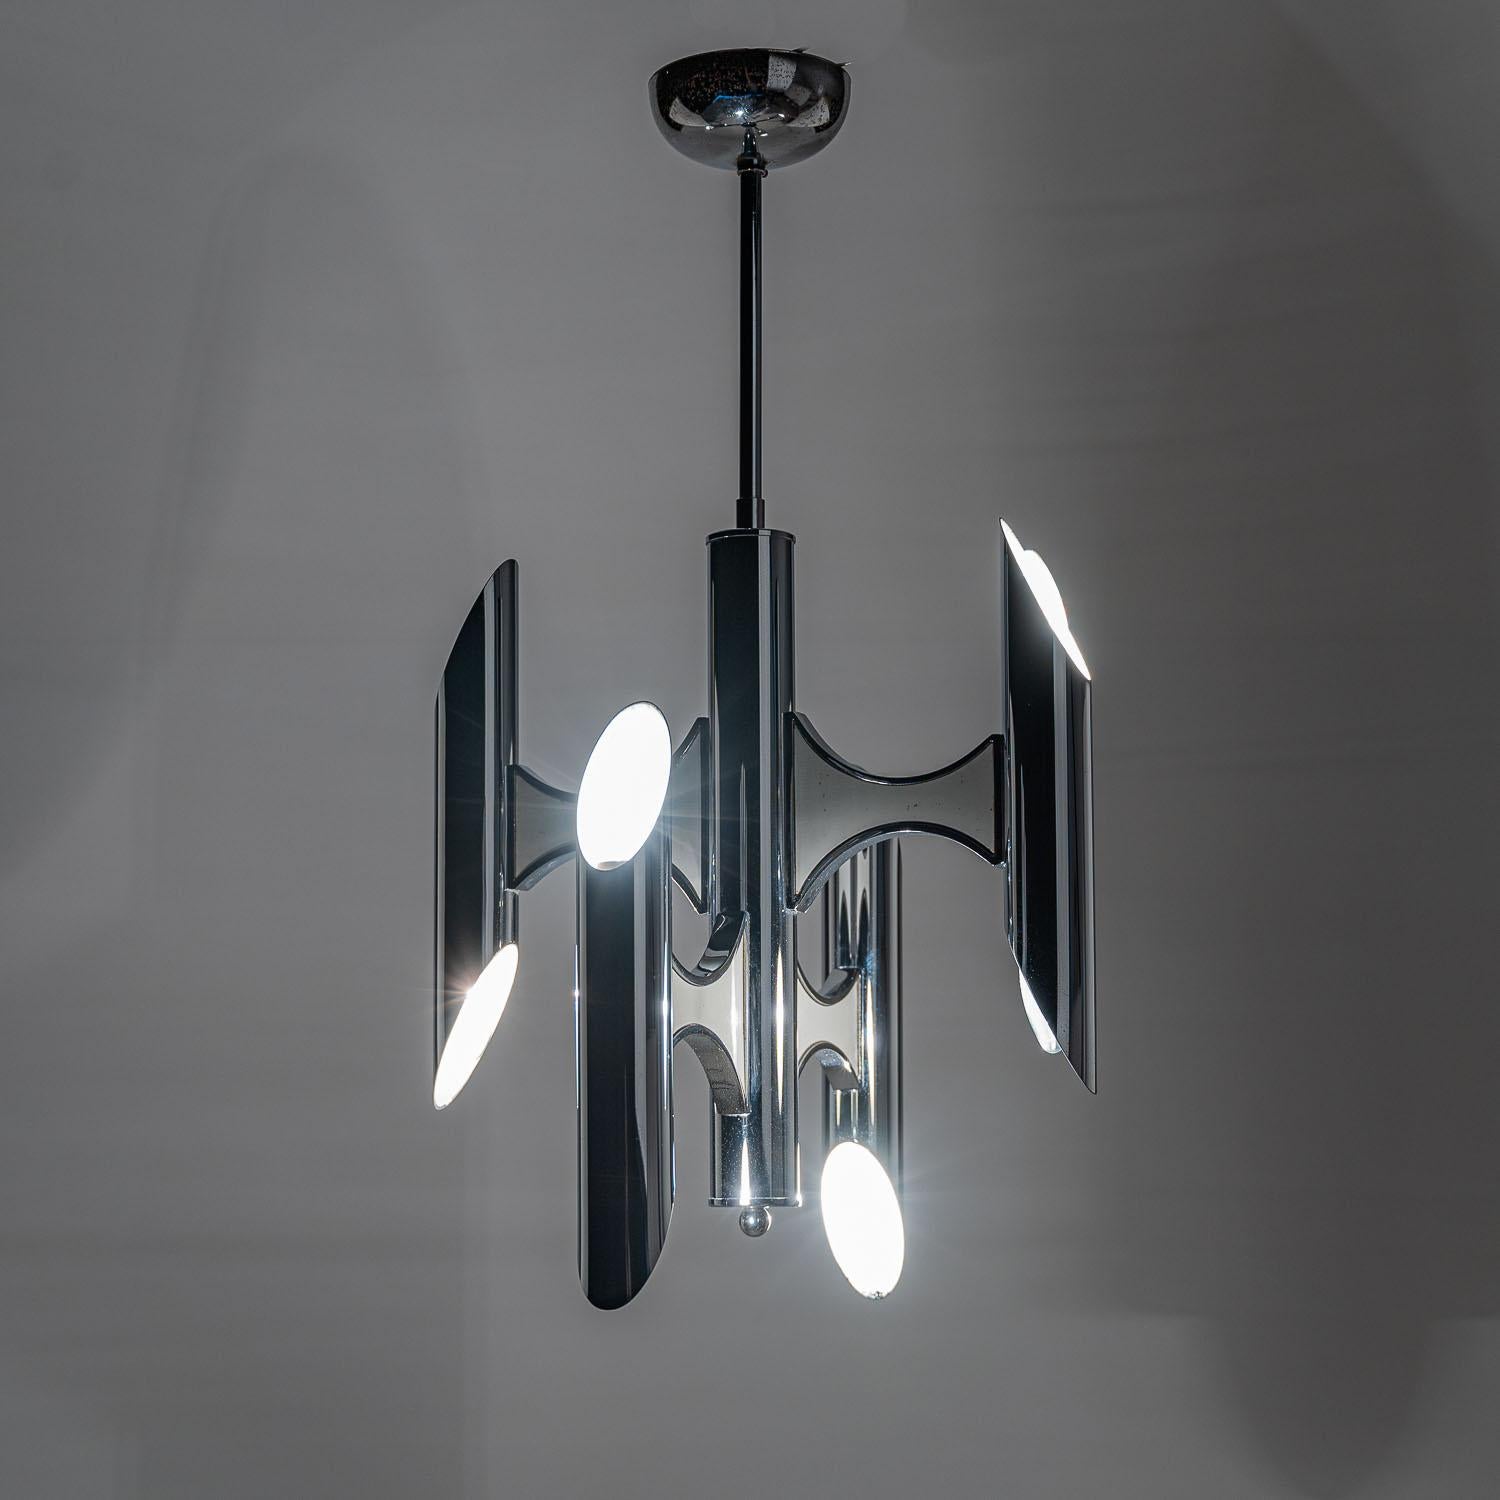 Pretty rare Orbit chandelier by Sciolari. It consists of a massive chrome bar with four arms. On both sides a E14 socket. To get to the wiring you can take of the white lacquered metal panels on the side, they are simply attached with a strong